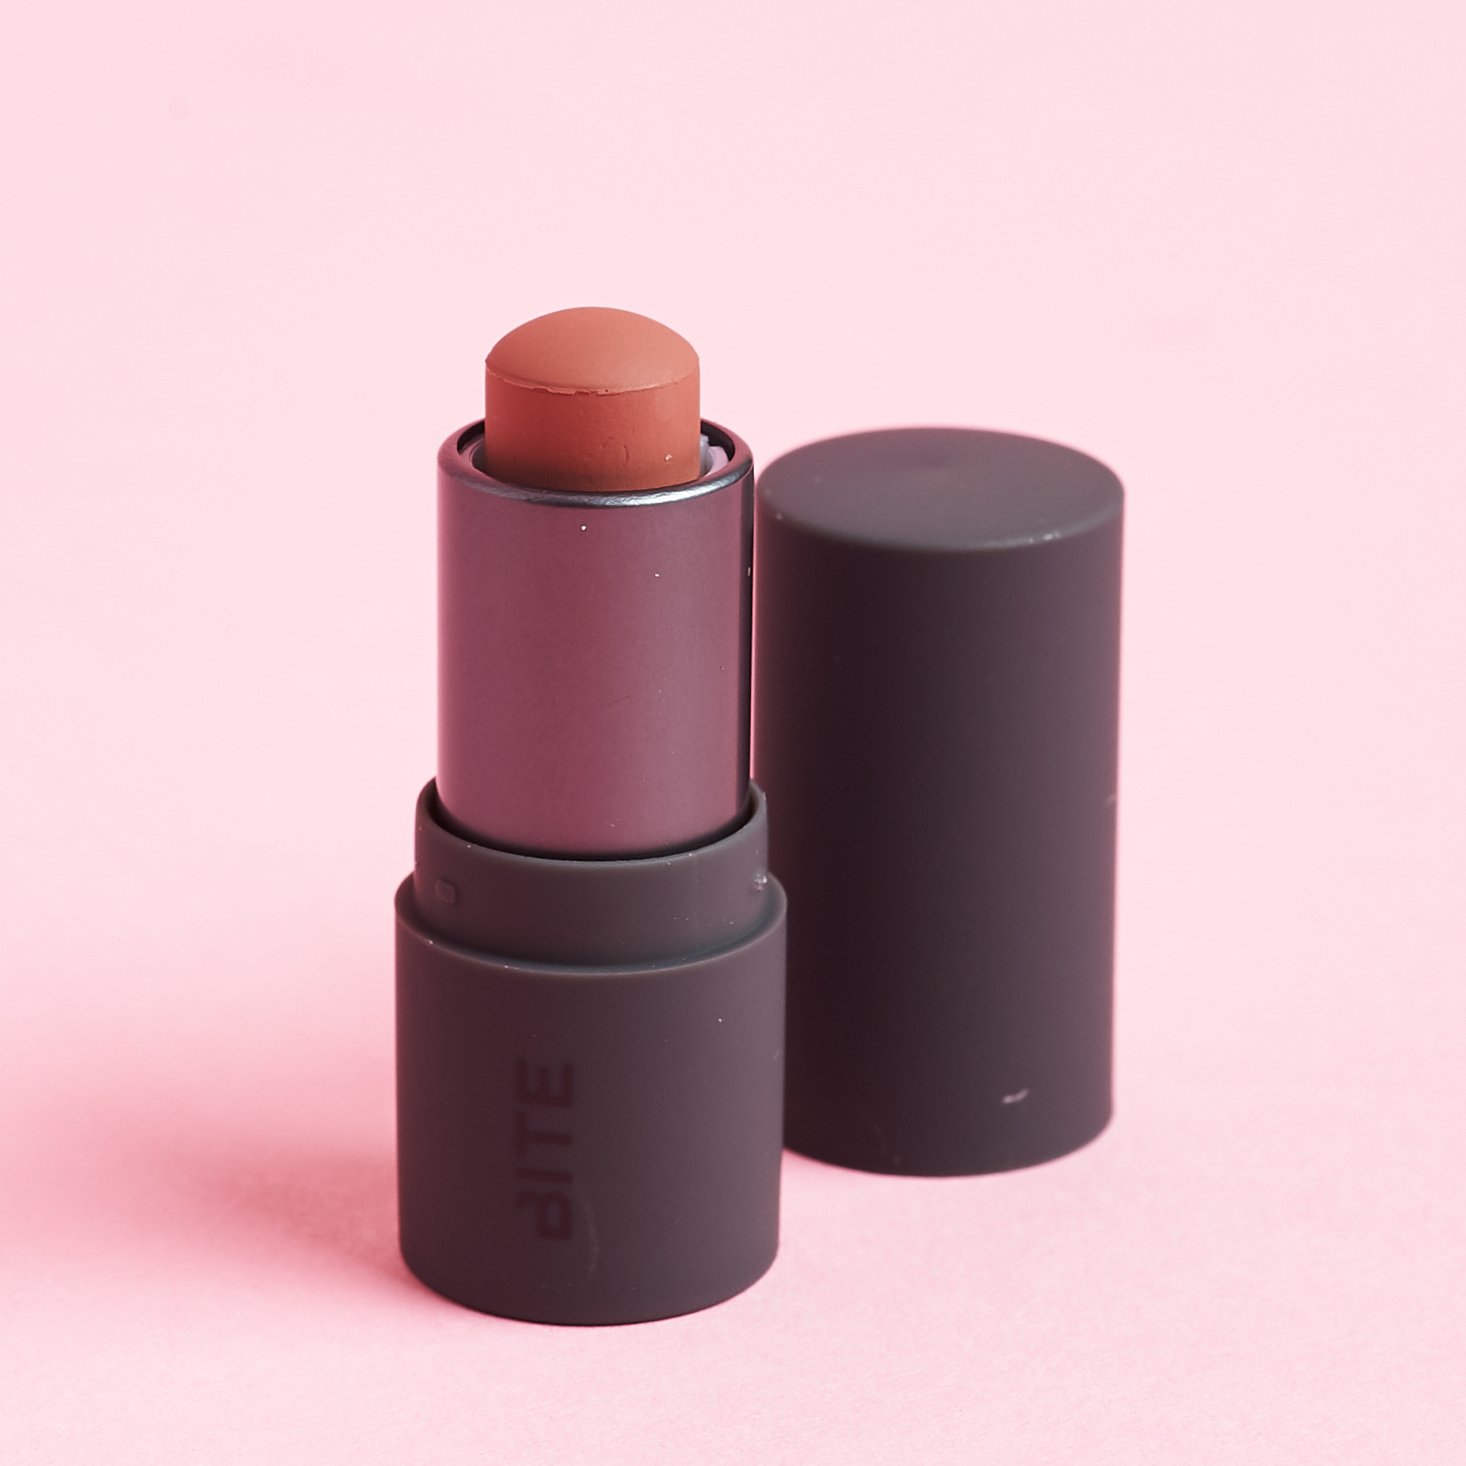 Bite Beauty Multistick in Cashew with cap off